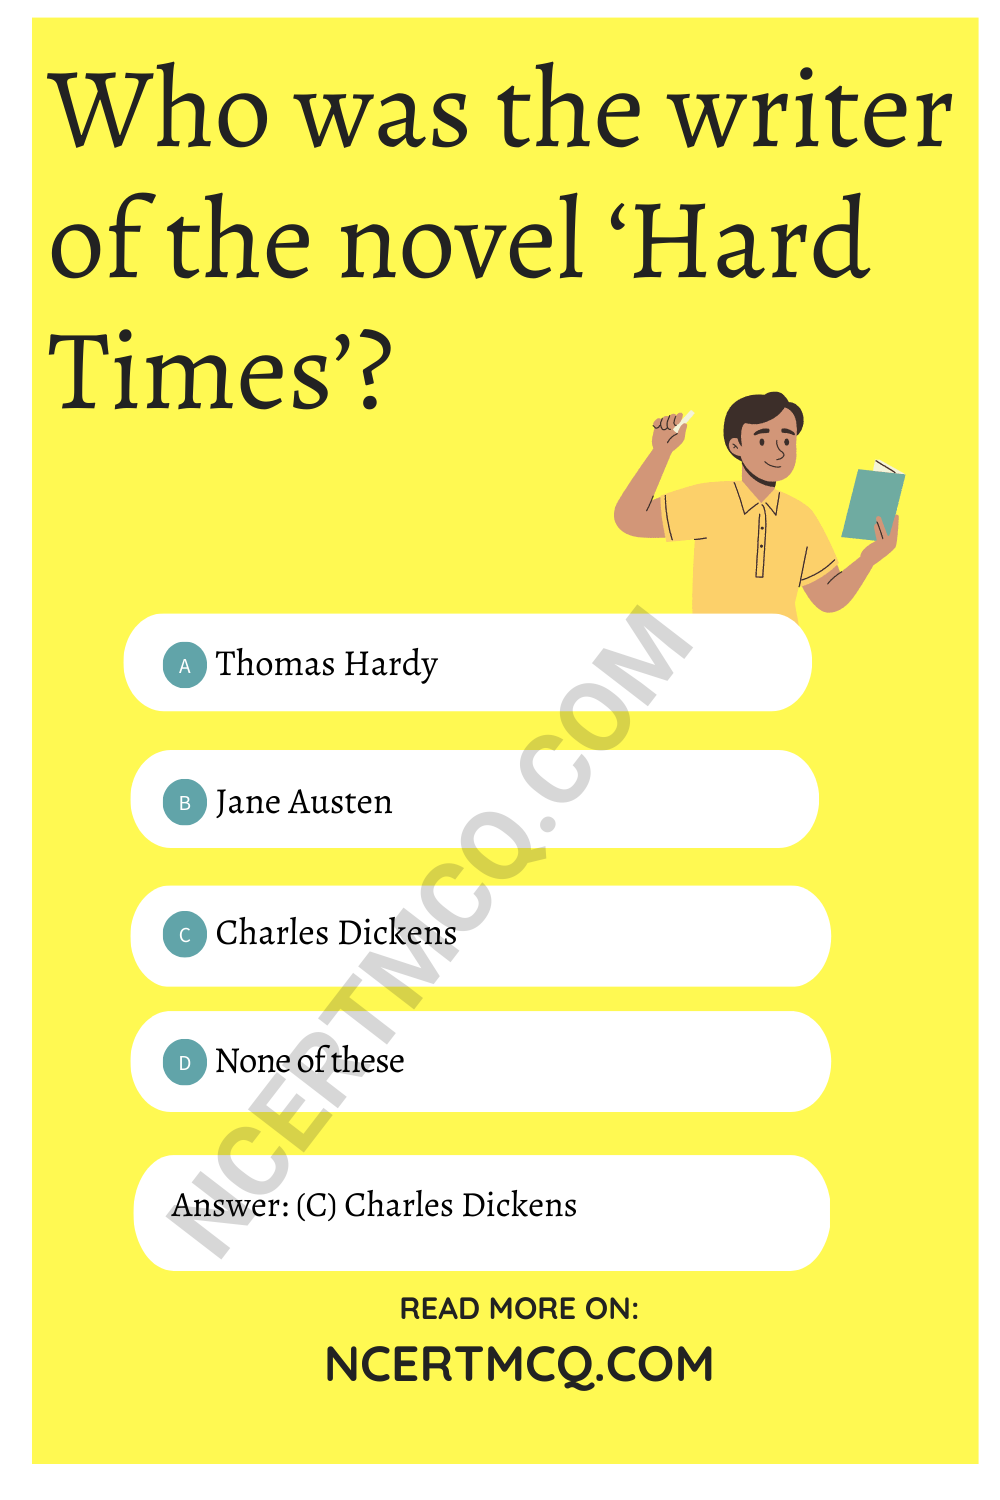 Who was the writer of the novel ‘Hard Times’?